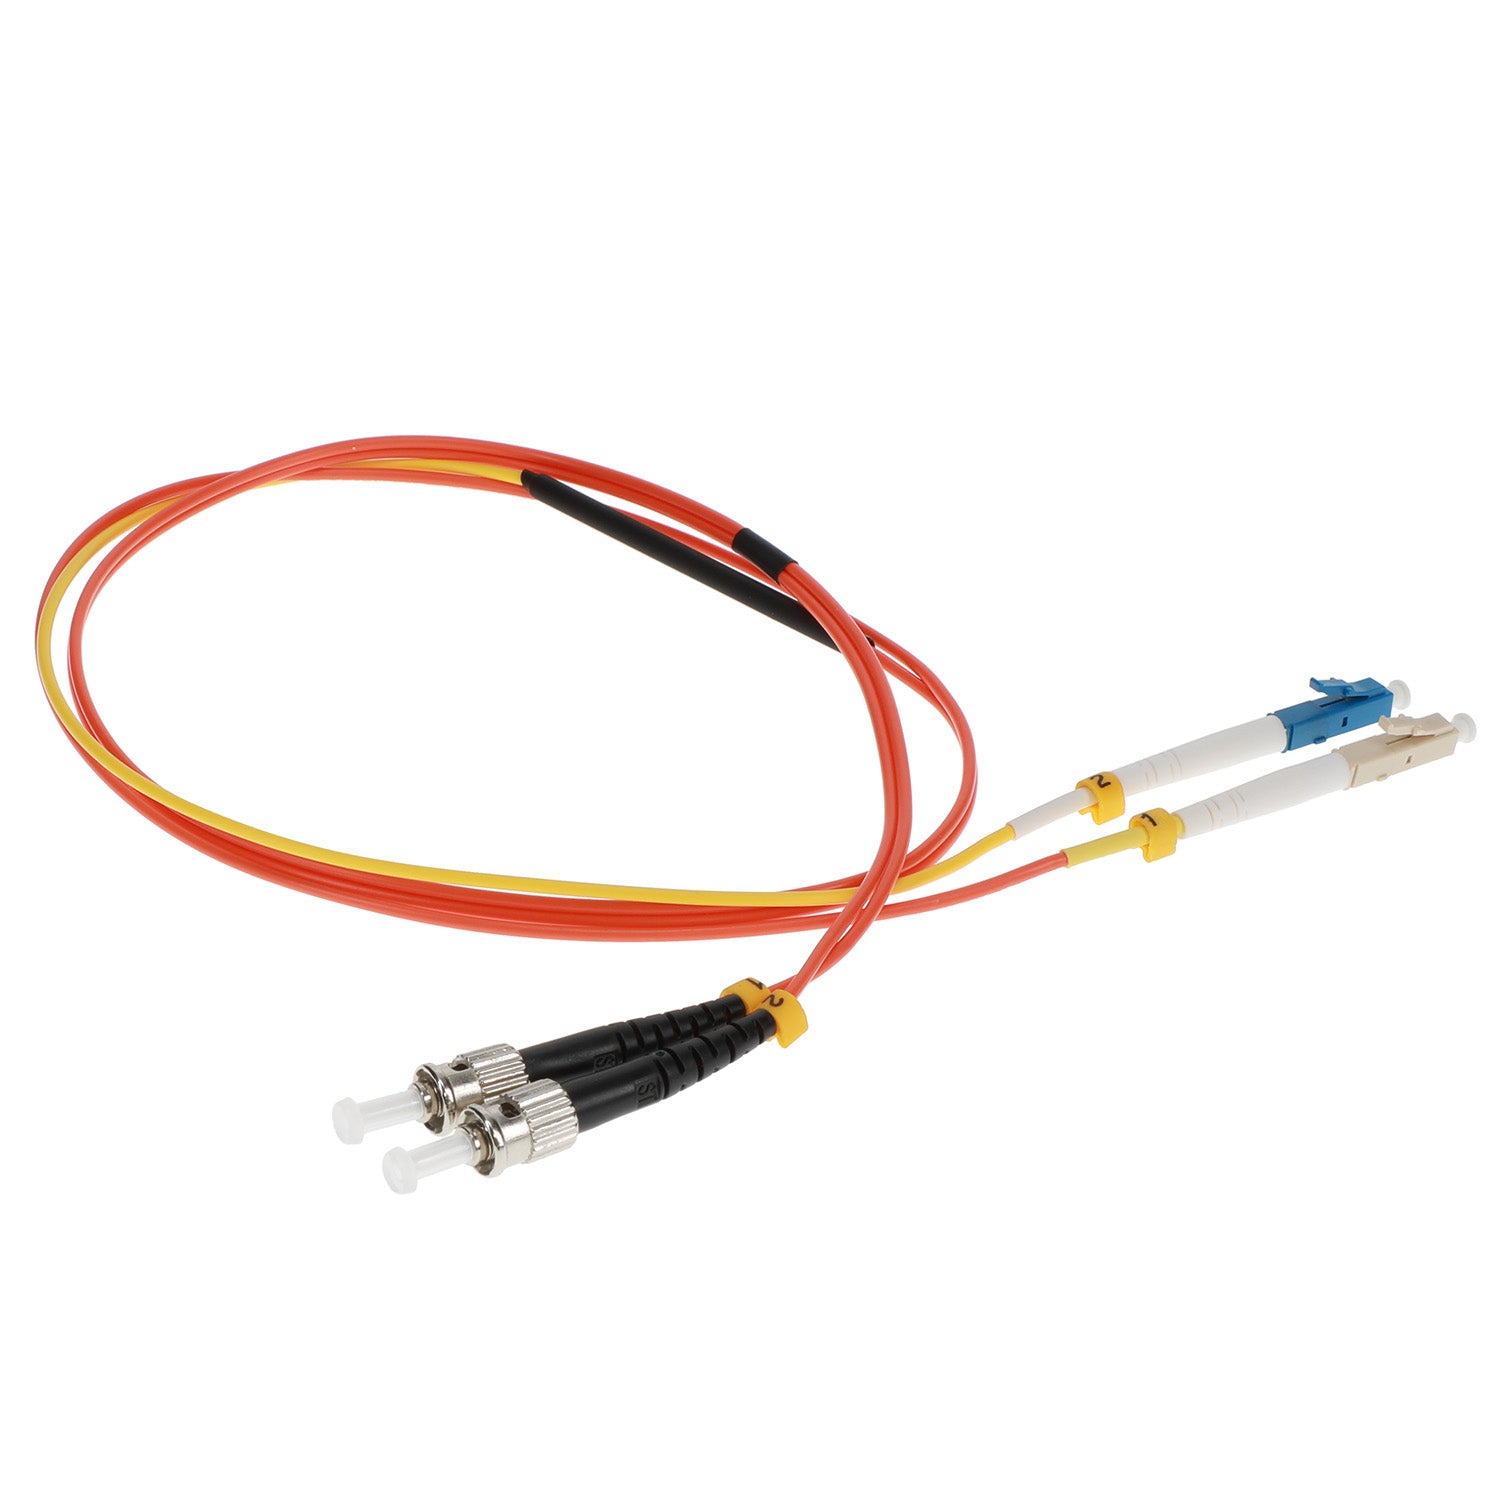 Singlemode LC to OM1 ST Duplex Mode Conditioning Fiber Optic Patch Cable